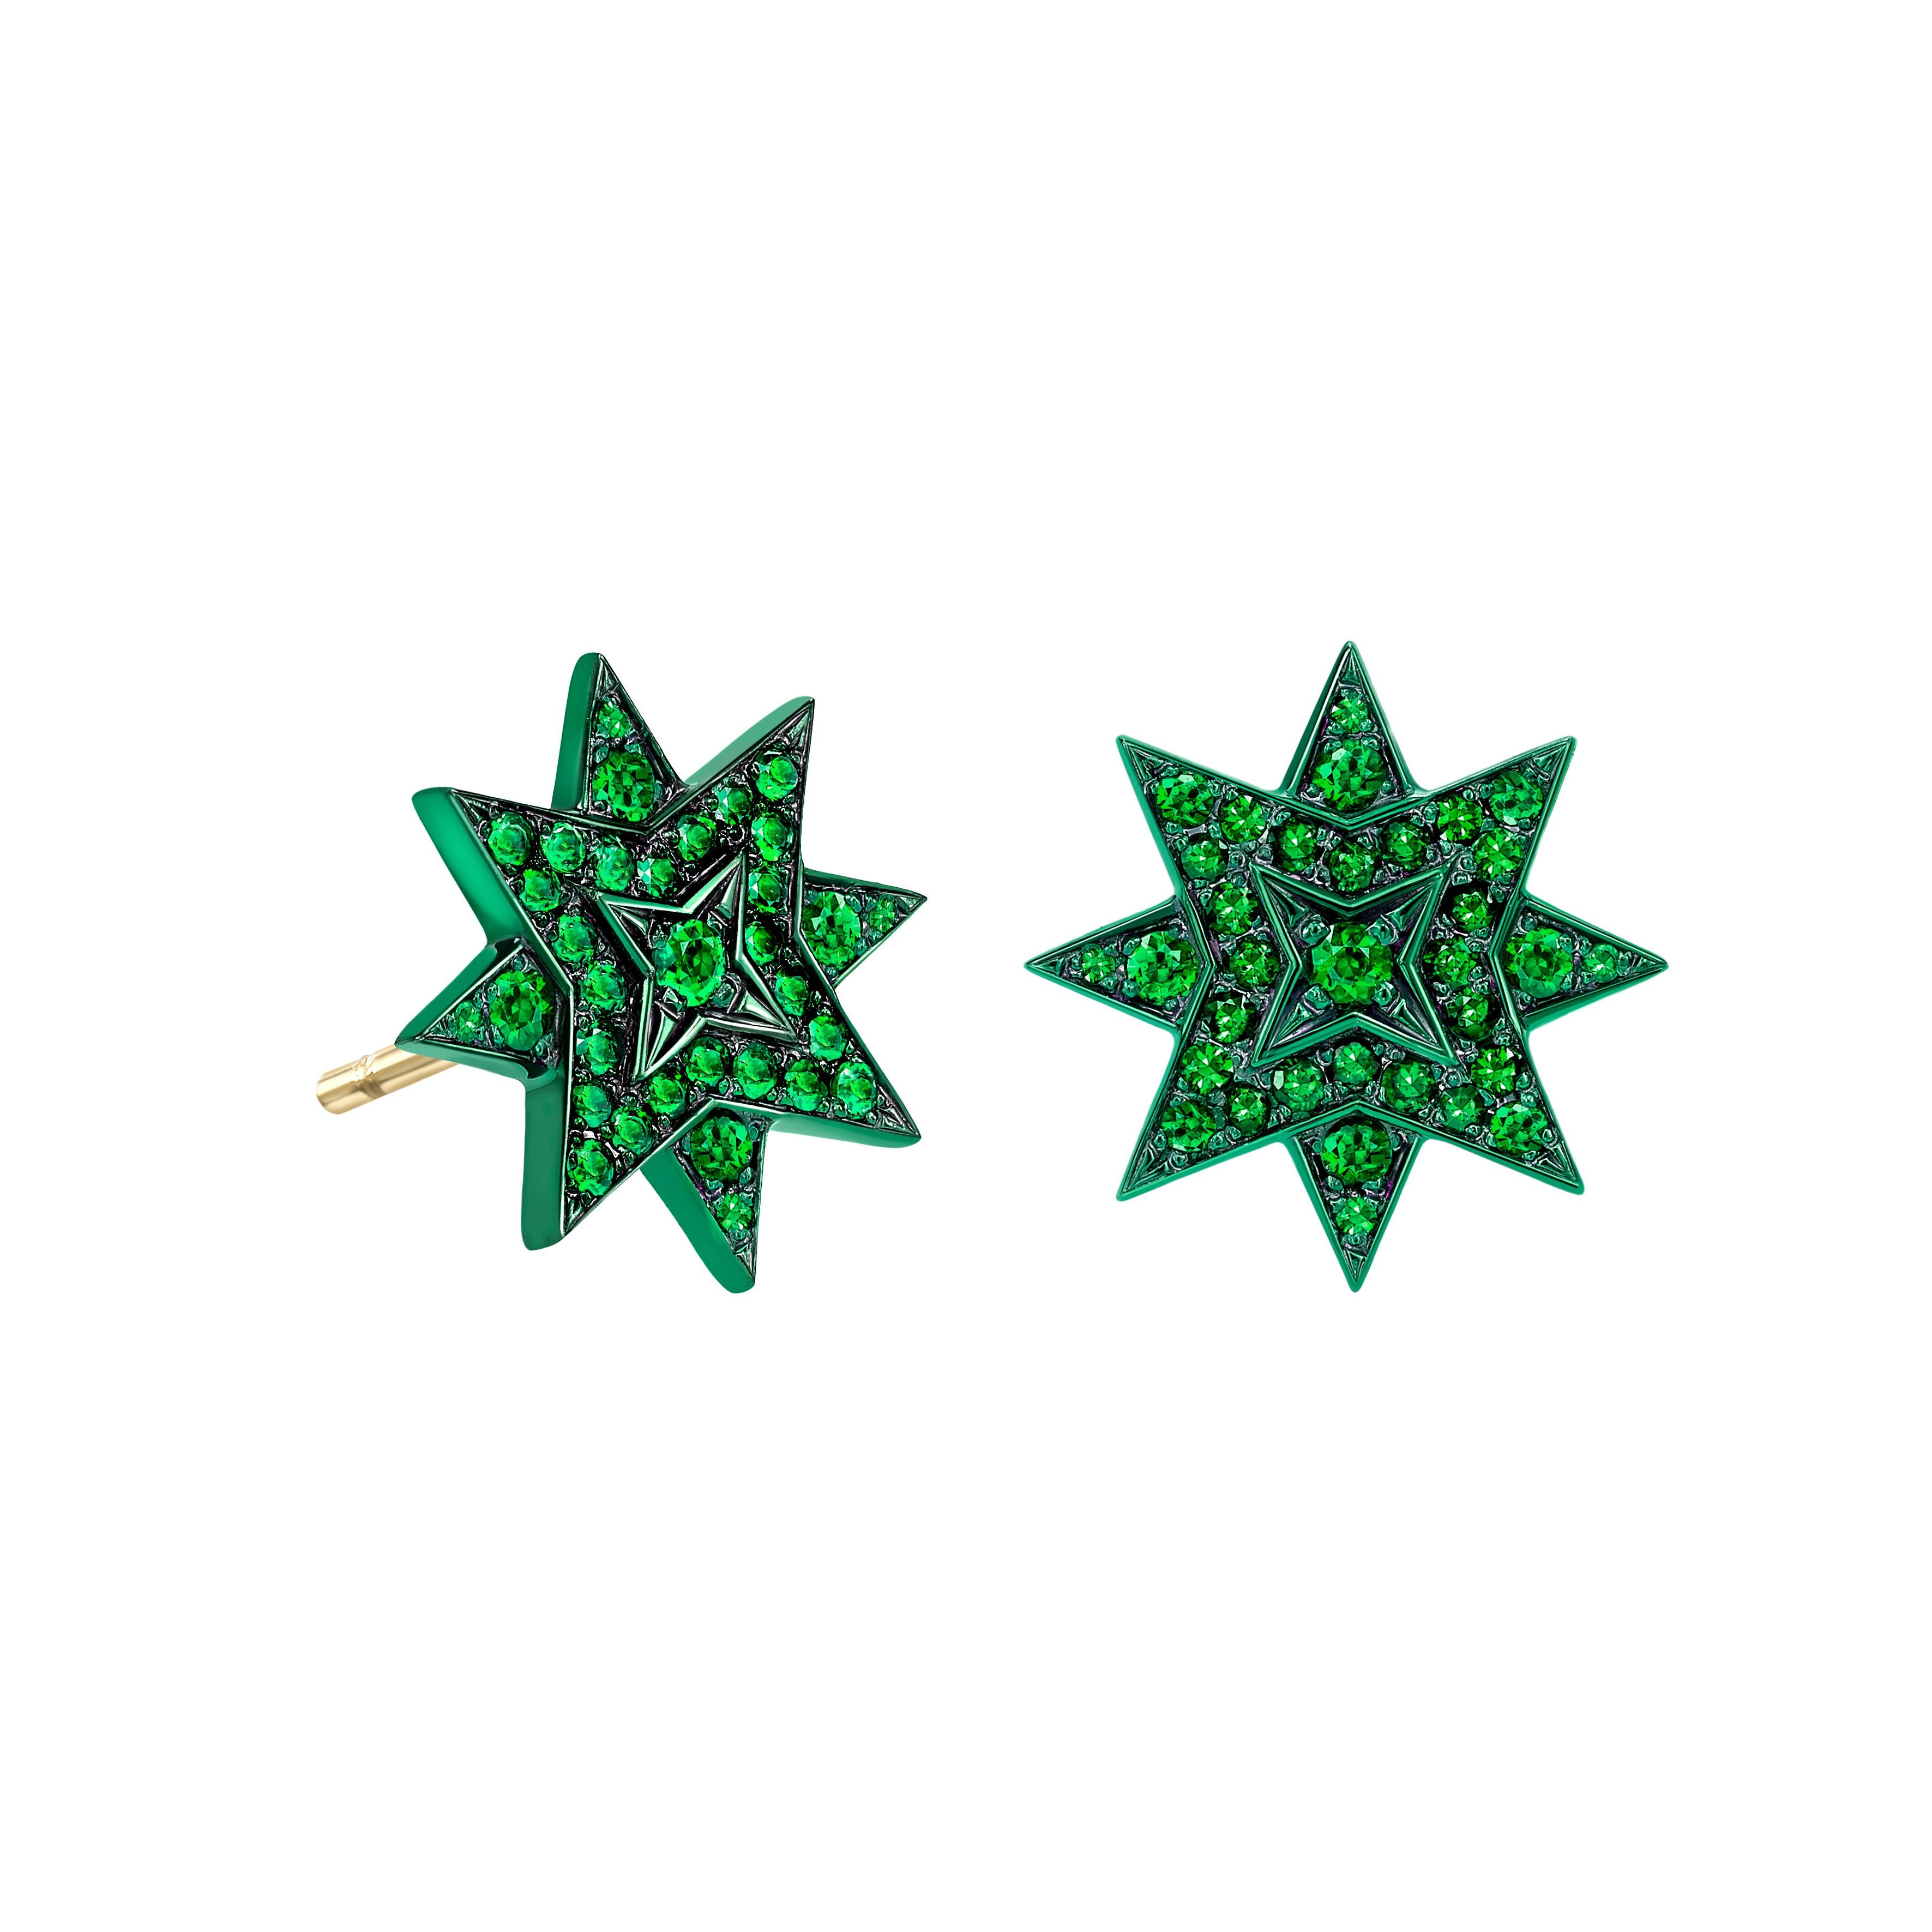 These beautiful star stud earrings have been handcrafted in London from 18ct yellow gold and are set with 0.80ct of emeralds. The top and sides of the stars have been finished with a green gold lacquer to enhance the electric green colour of the